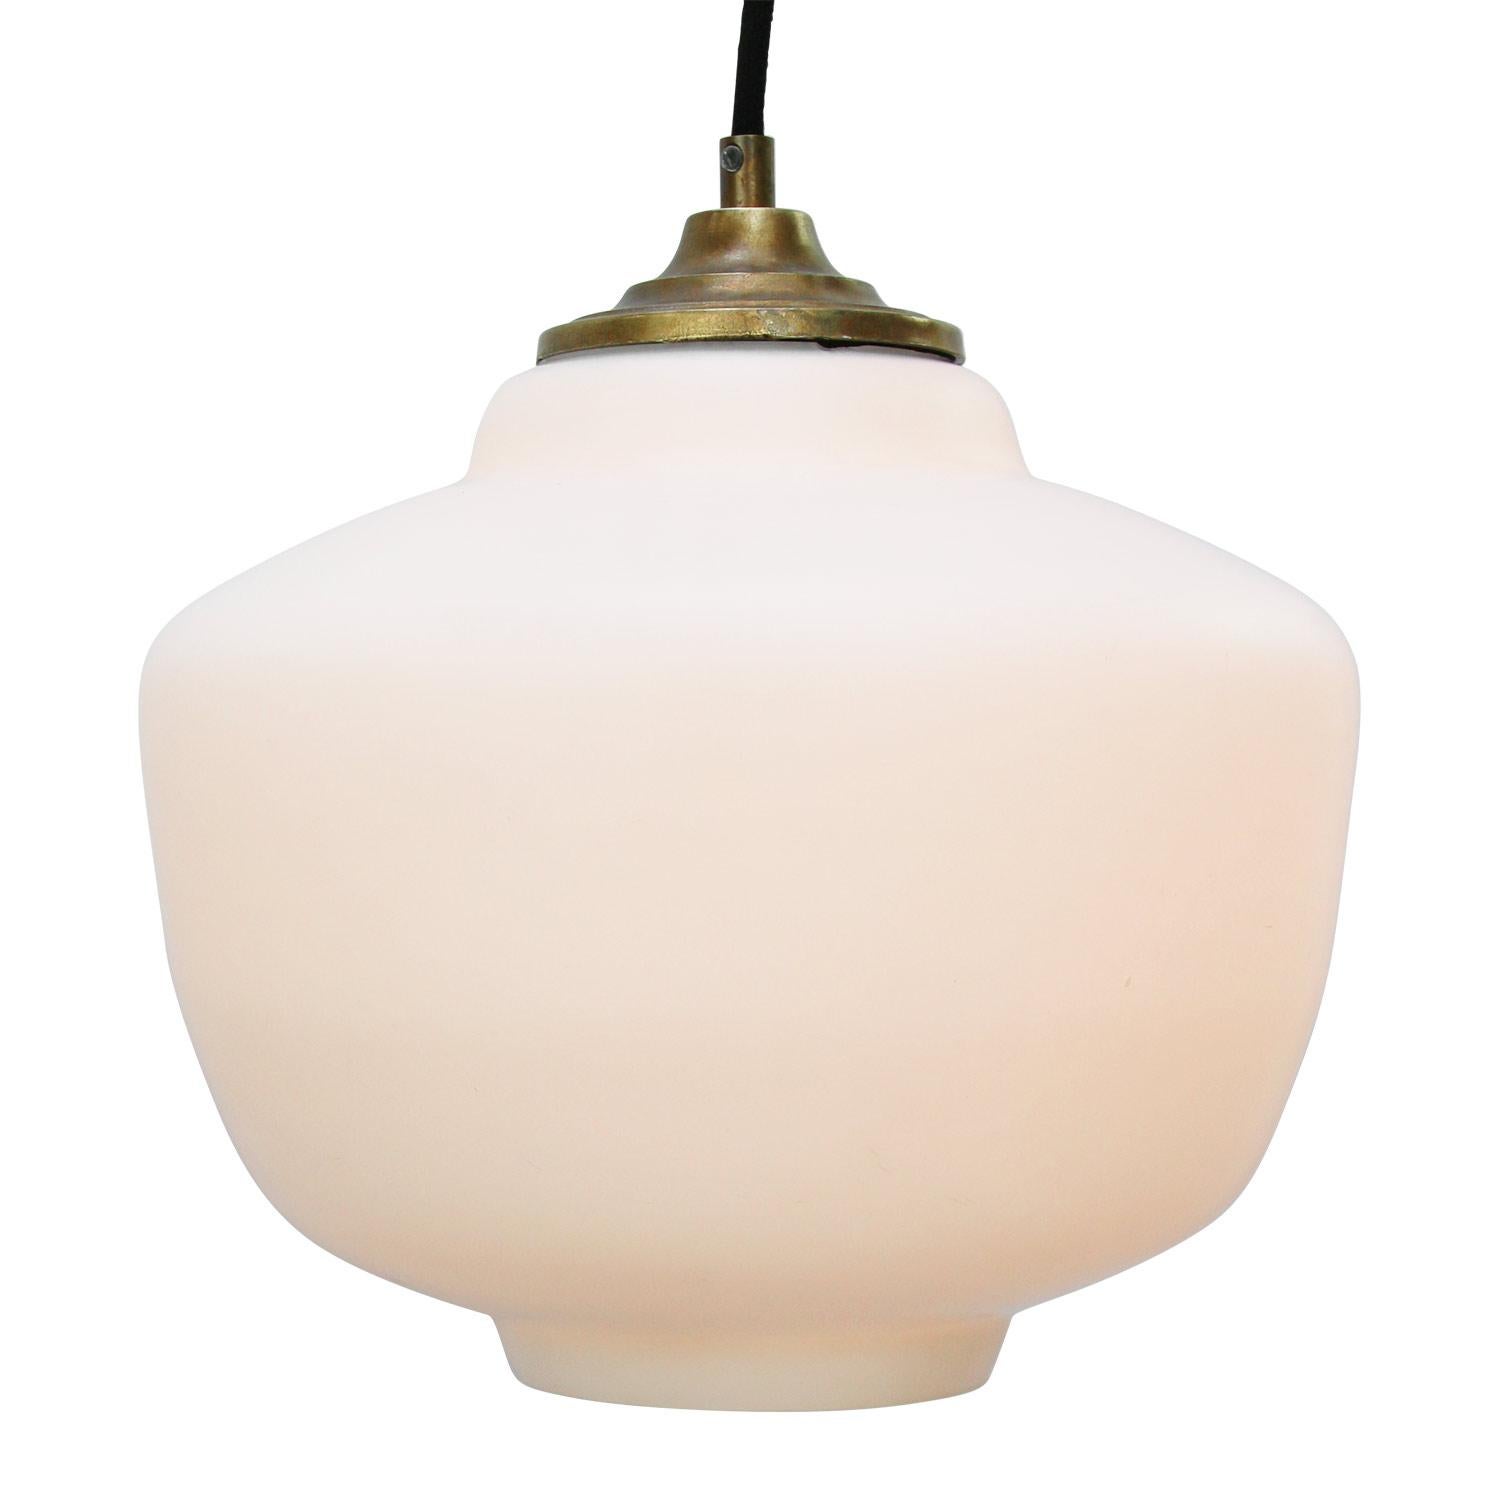 Opaline glass pendant.
2 meter black wire

Weight: 1.80 kg / 4 lb

Priced per individual item. All lamps have been made suitable by international standards for incandescent light bulbs, energy-efficient and LED bulbs. E26/E27 bulb holders and